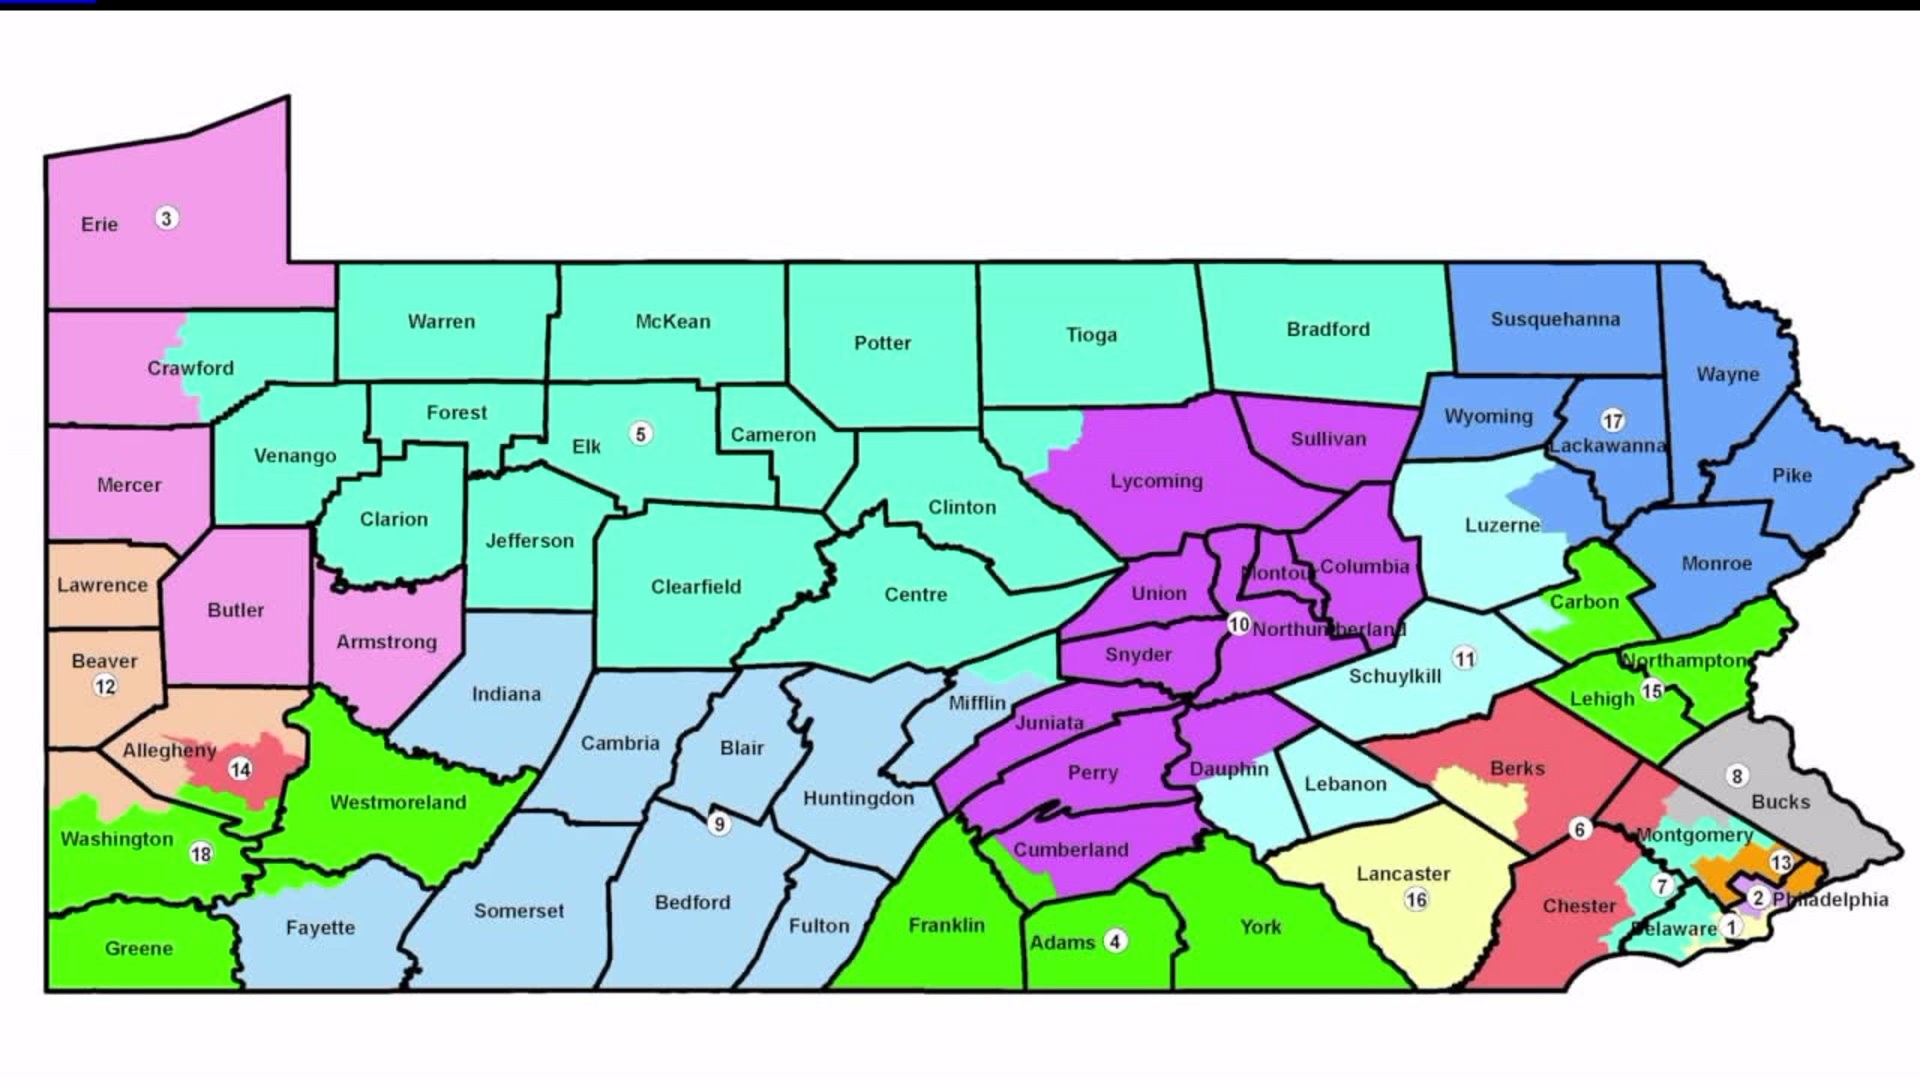 Pa. Republican leaders meet challenge to redraw congressional districts